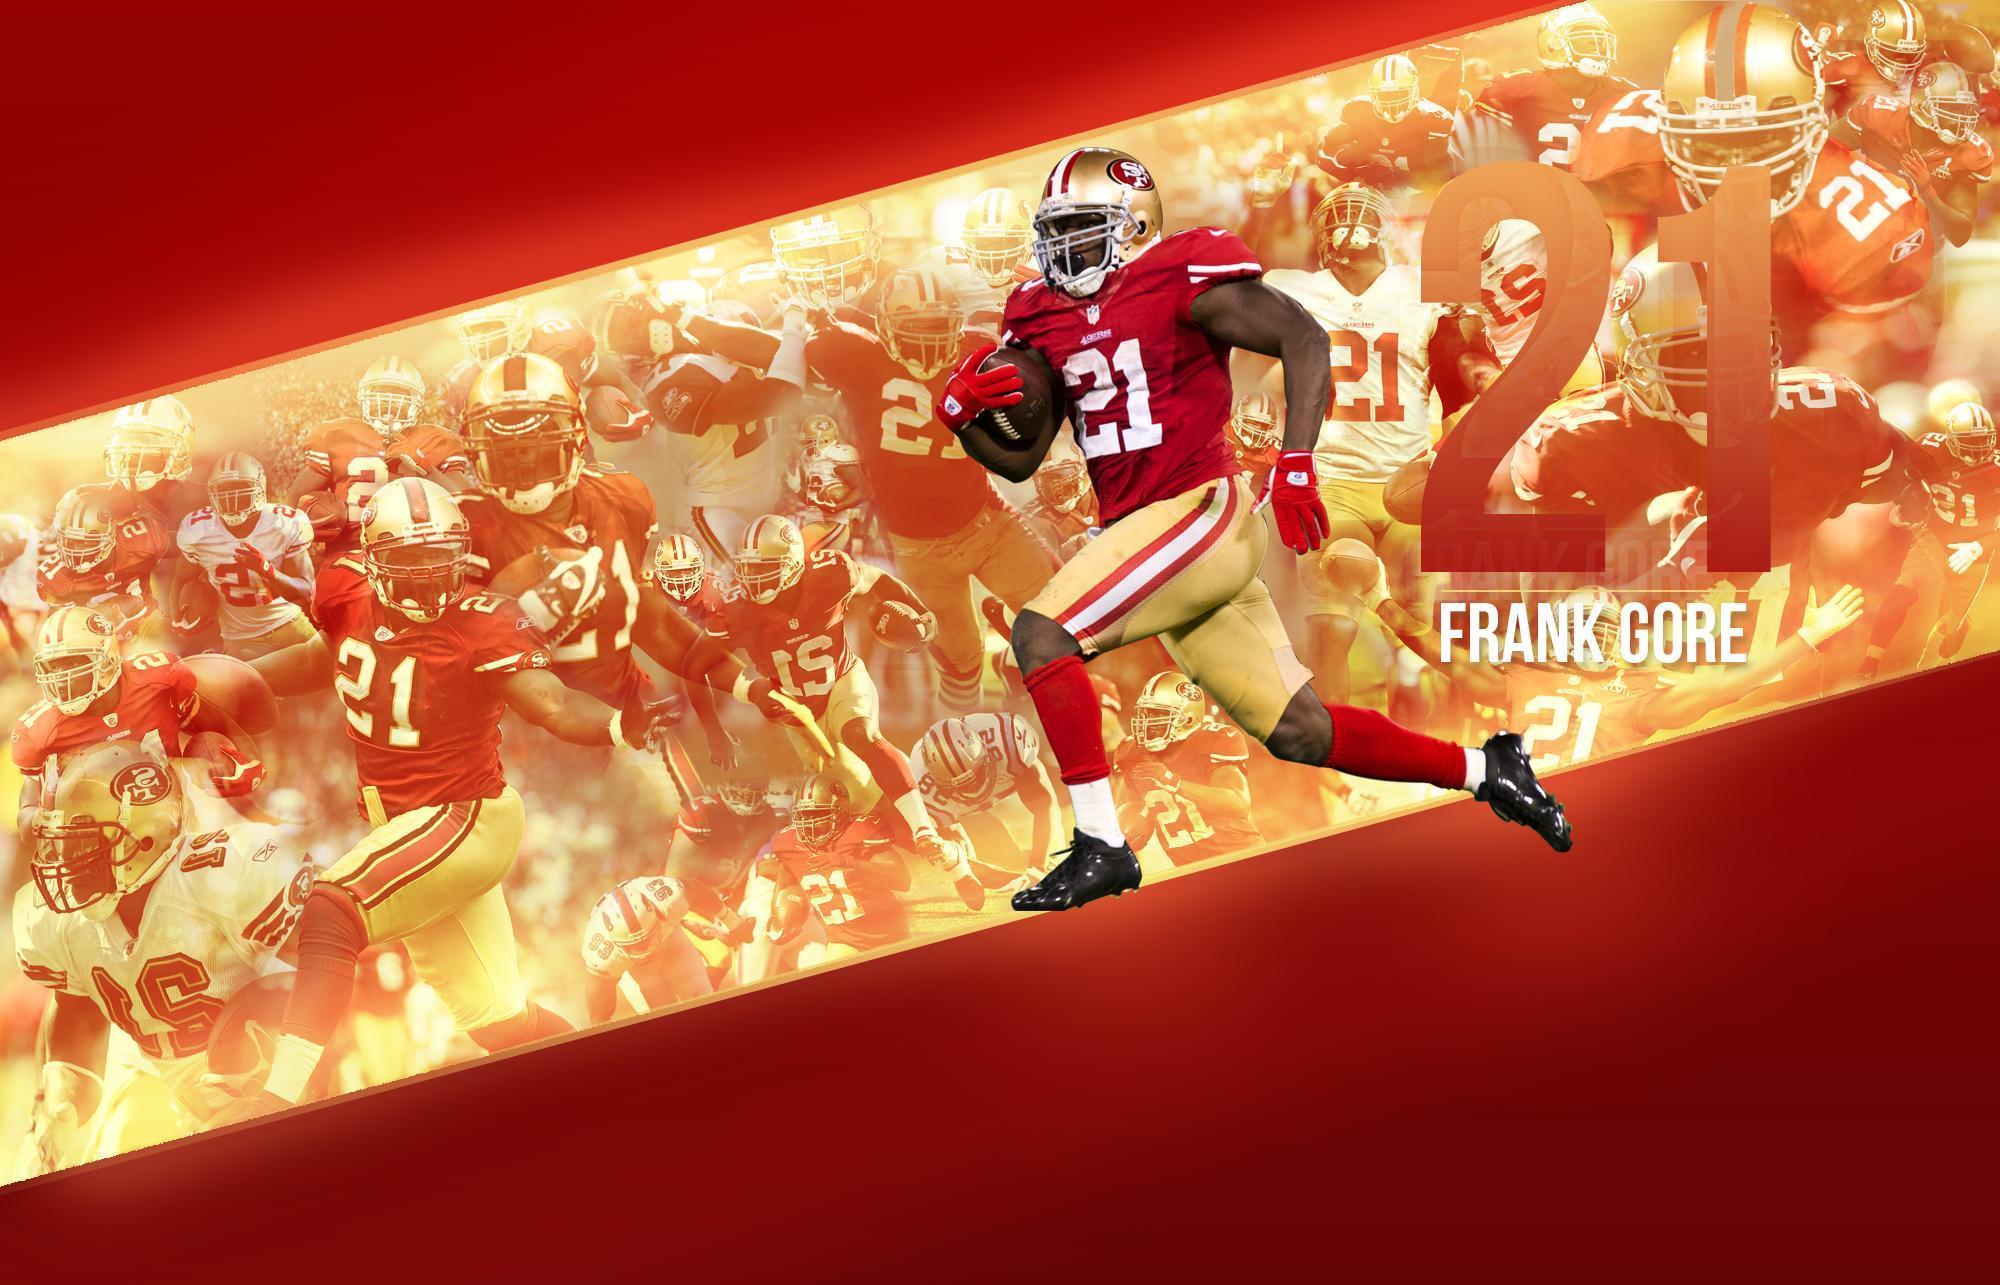 Frank Gore Wallpapers